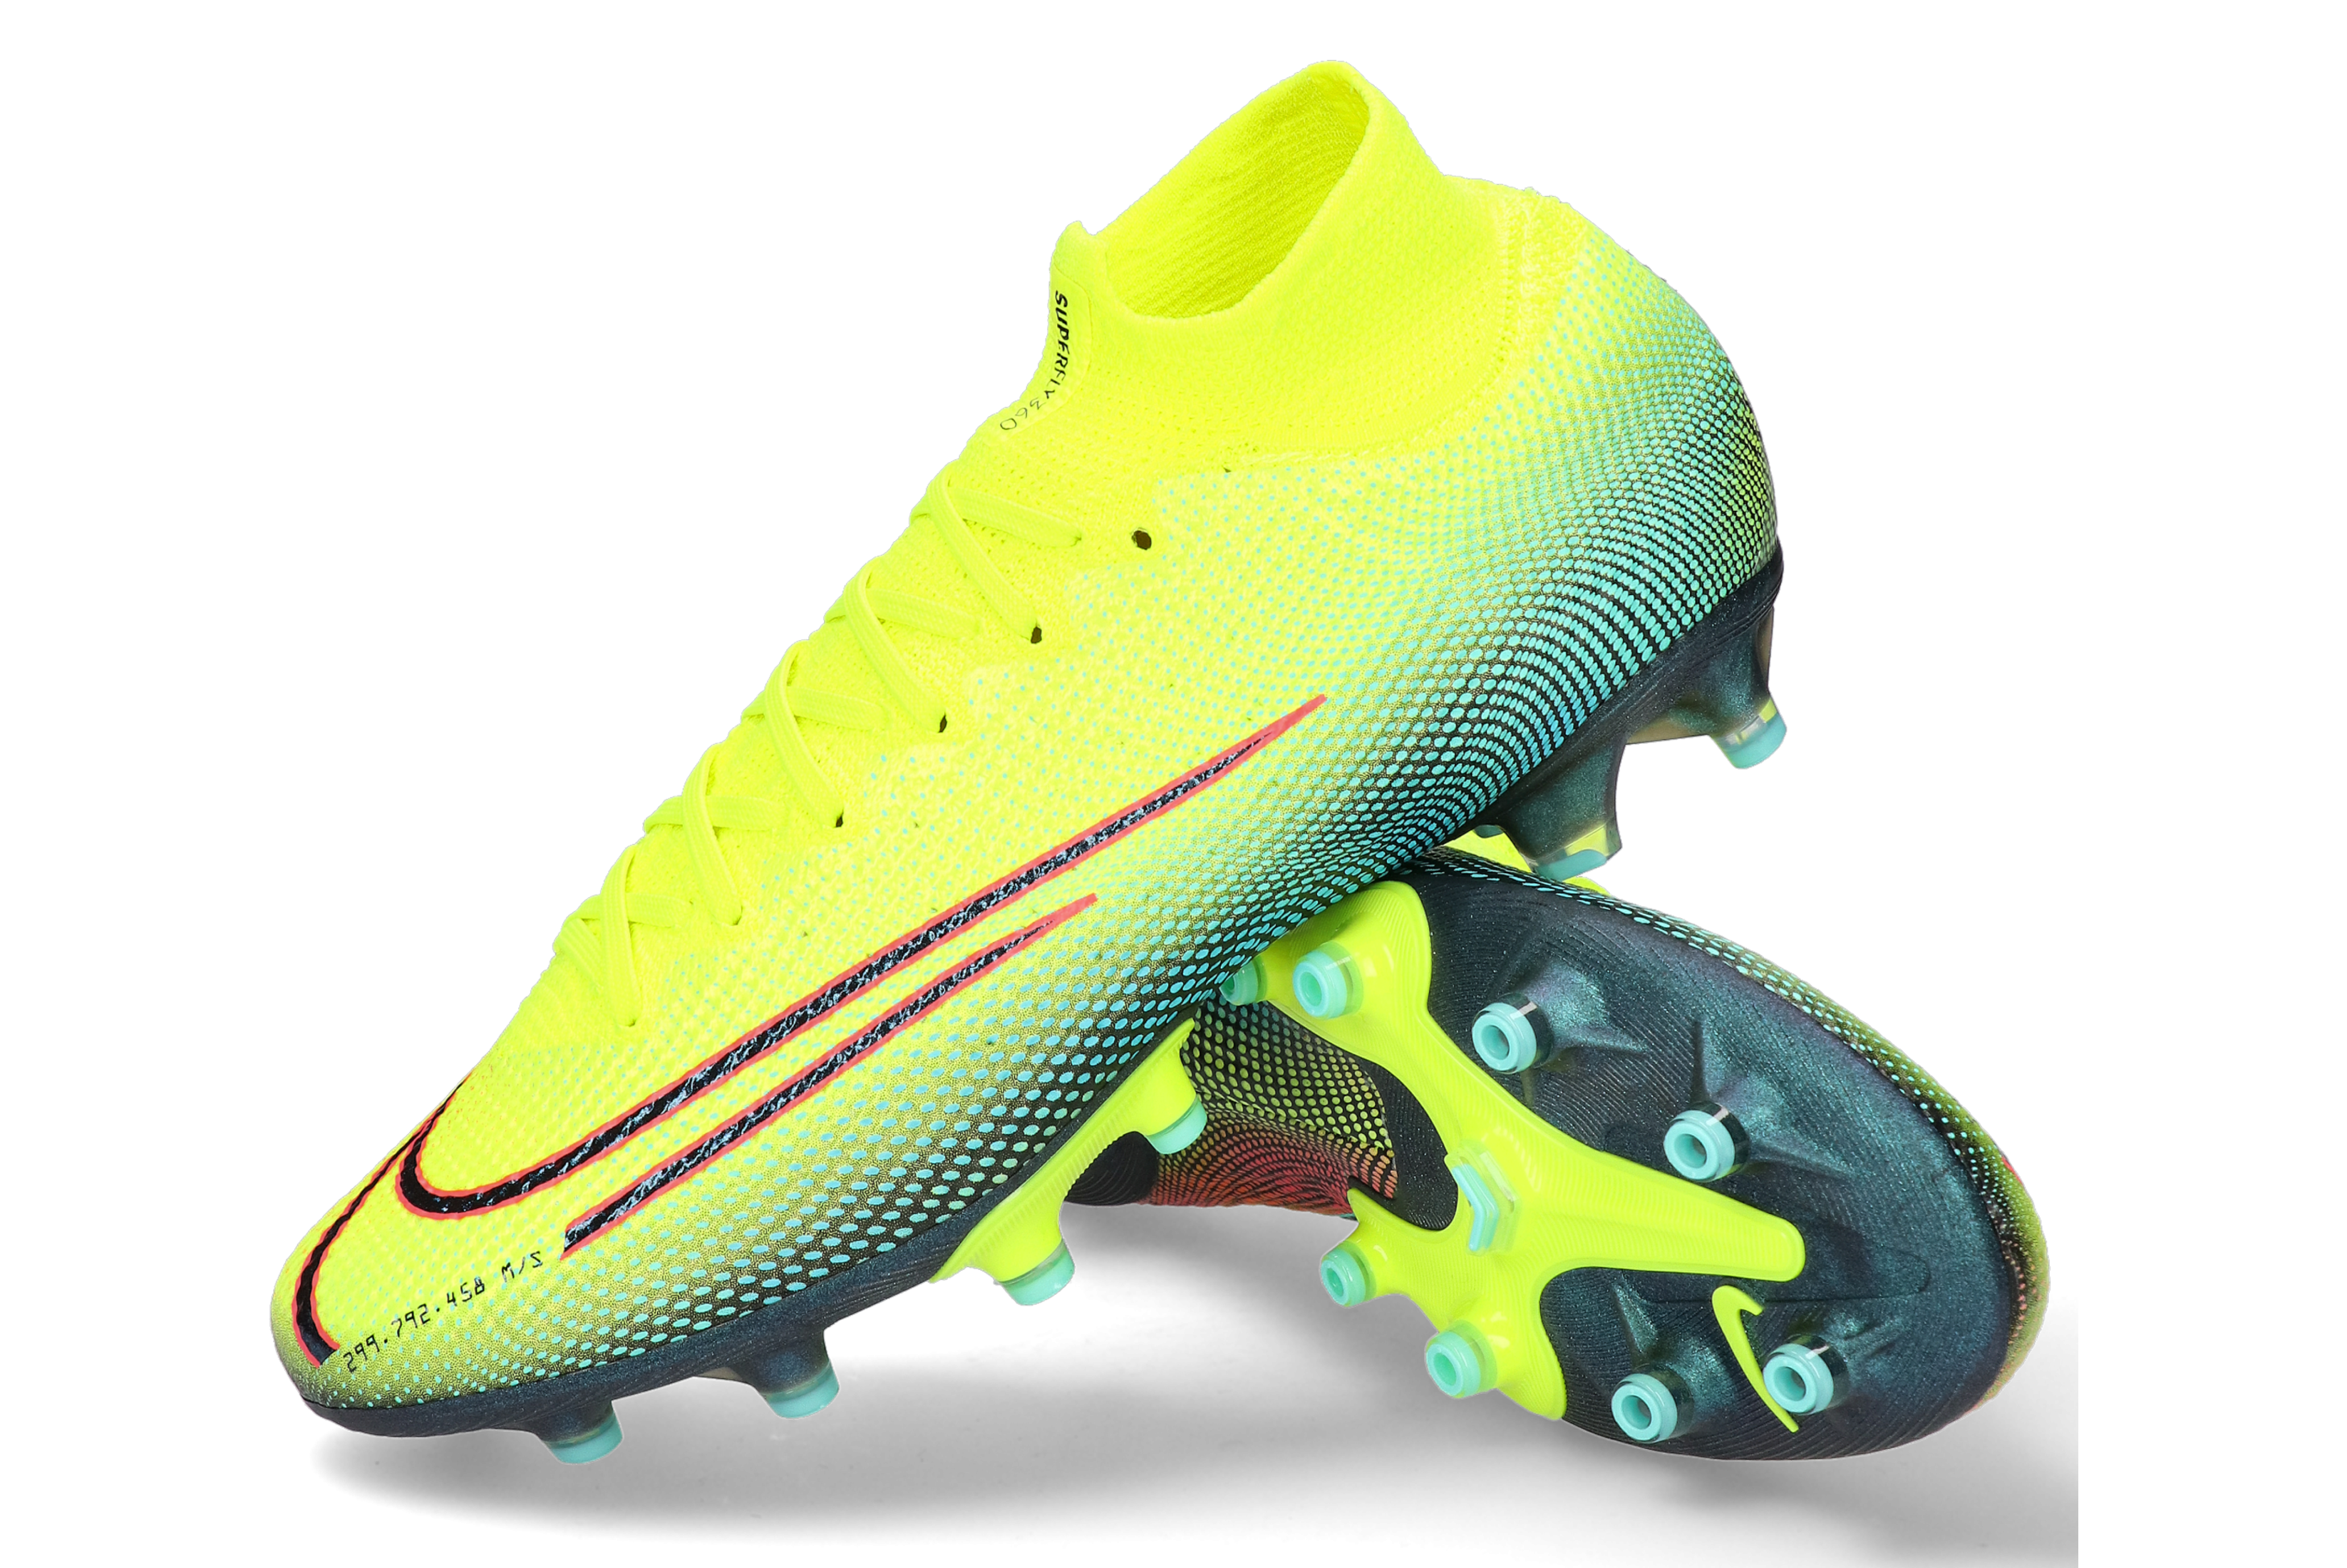 Nike Mercurial Superfly VI Pro FG Soccer Cleats White Total.